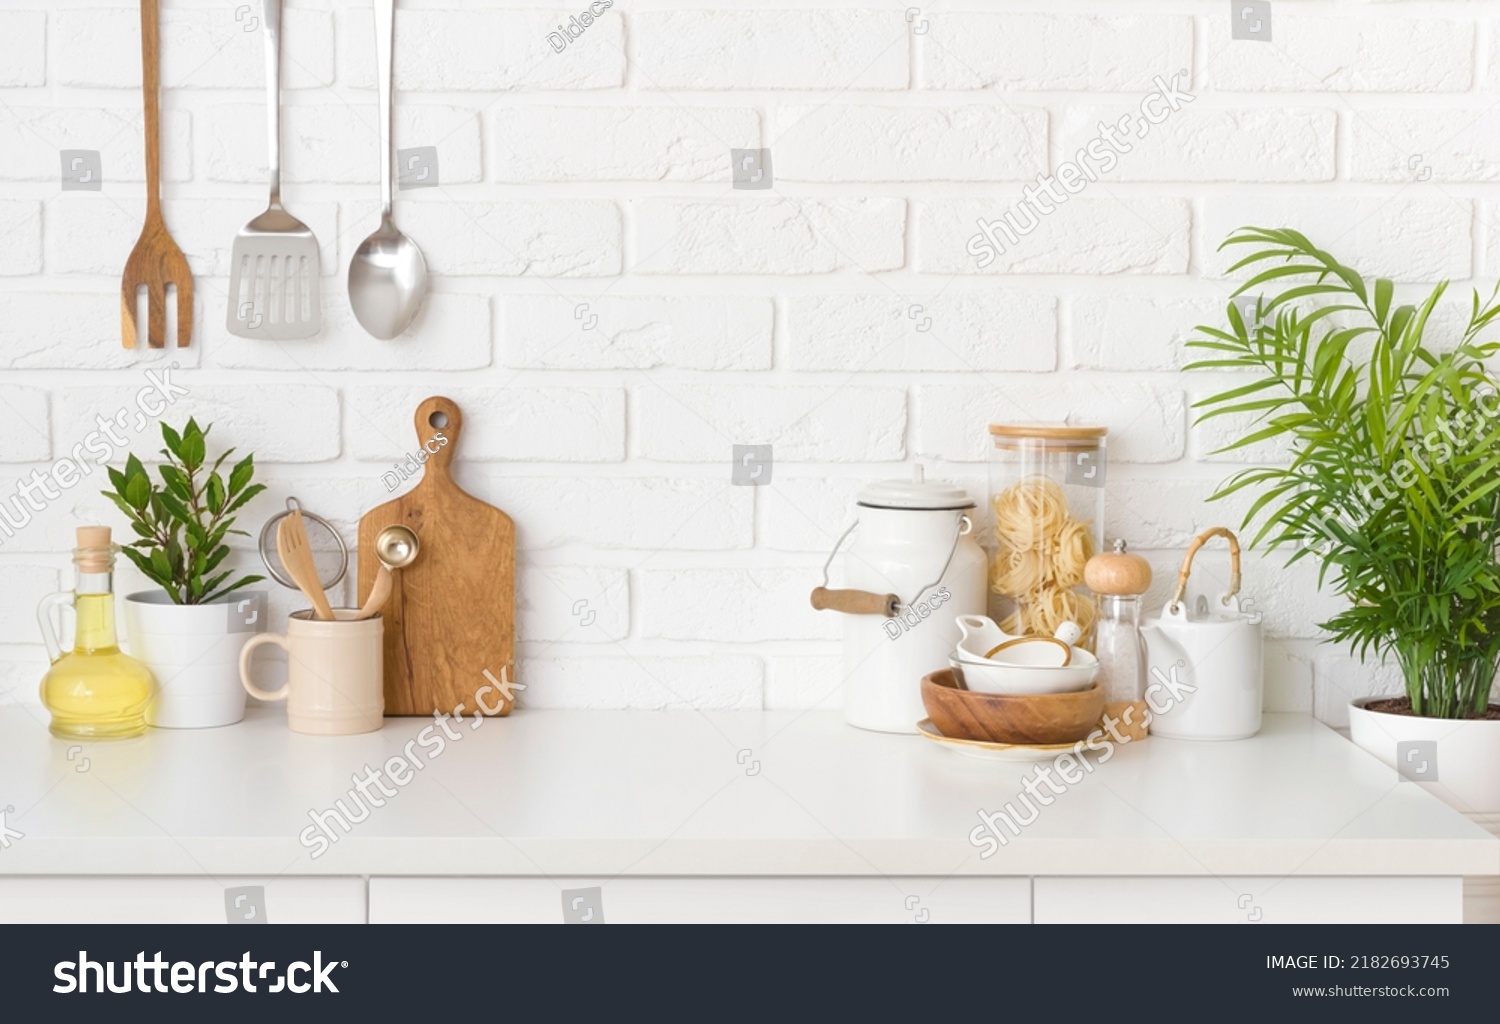 Kitchen utensils, cooking ingredients and kitchenware on white counter table #2182693745